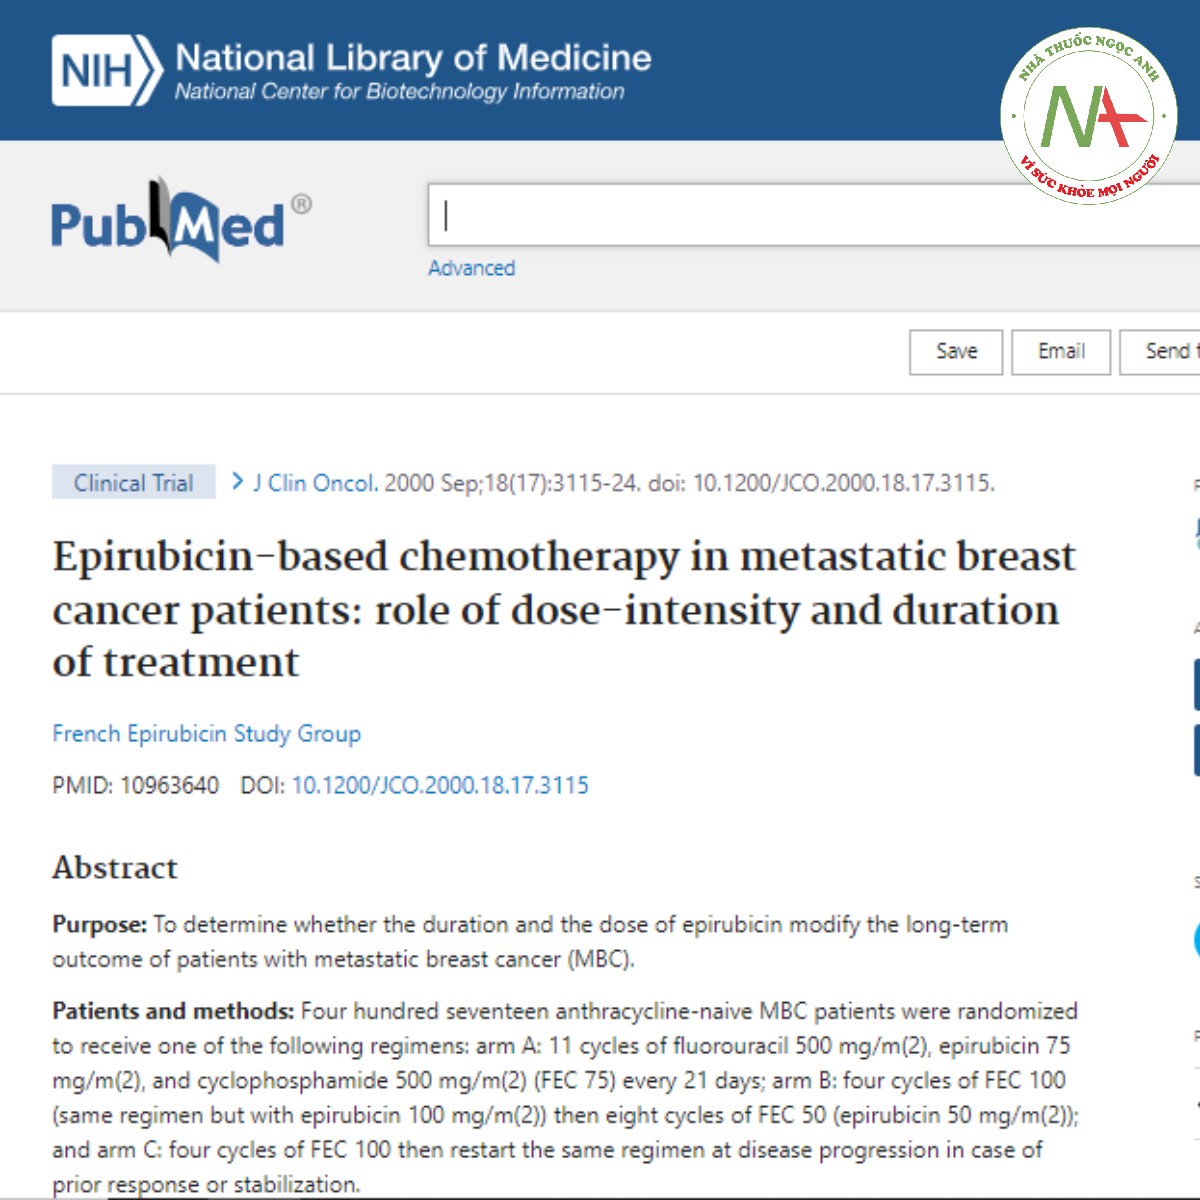 Epirubicin-based chemotherapy in metastatic breast cancer patients_ role of dose-intensity and duration of treatment